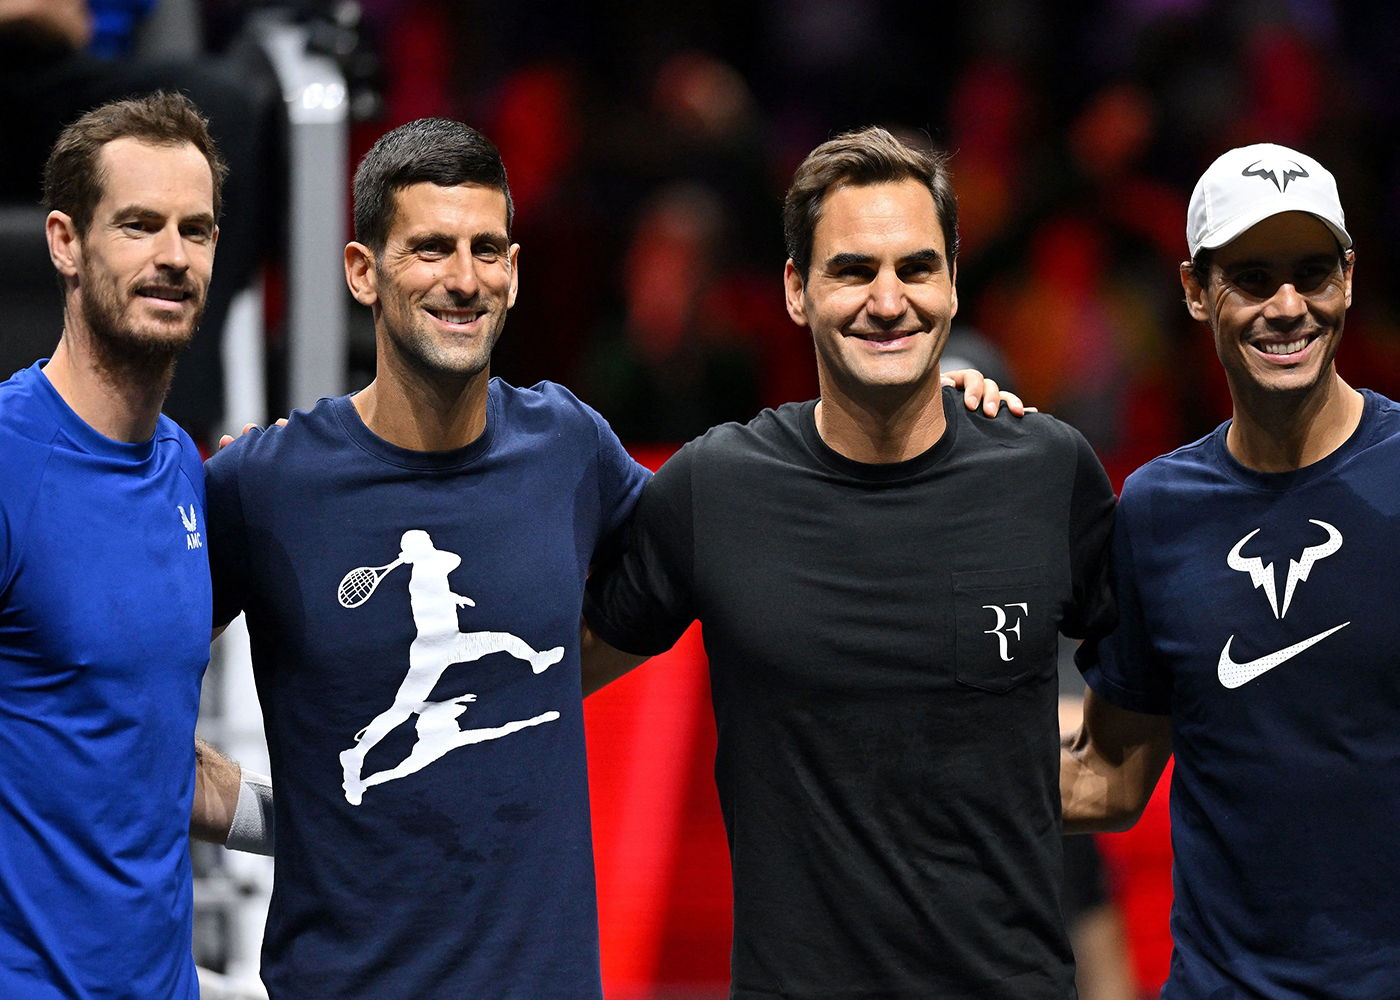 Roger Federer`s last match will be doubles with Rafael Nadal as partner at Laver Cup 2022, SEE PICS 